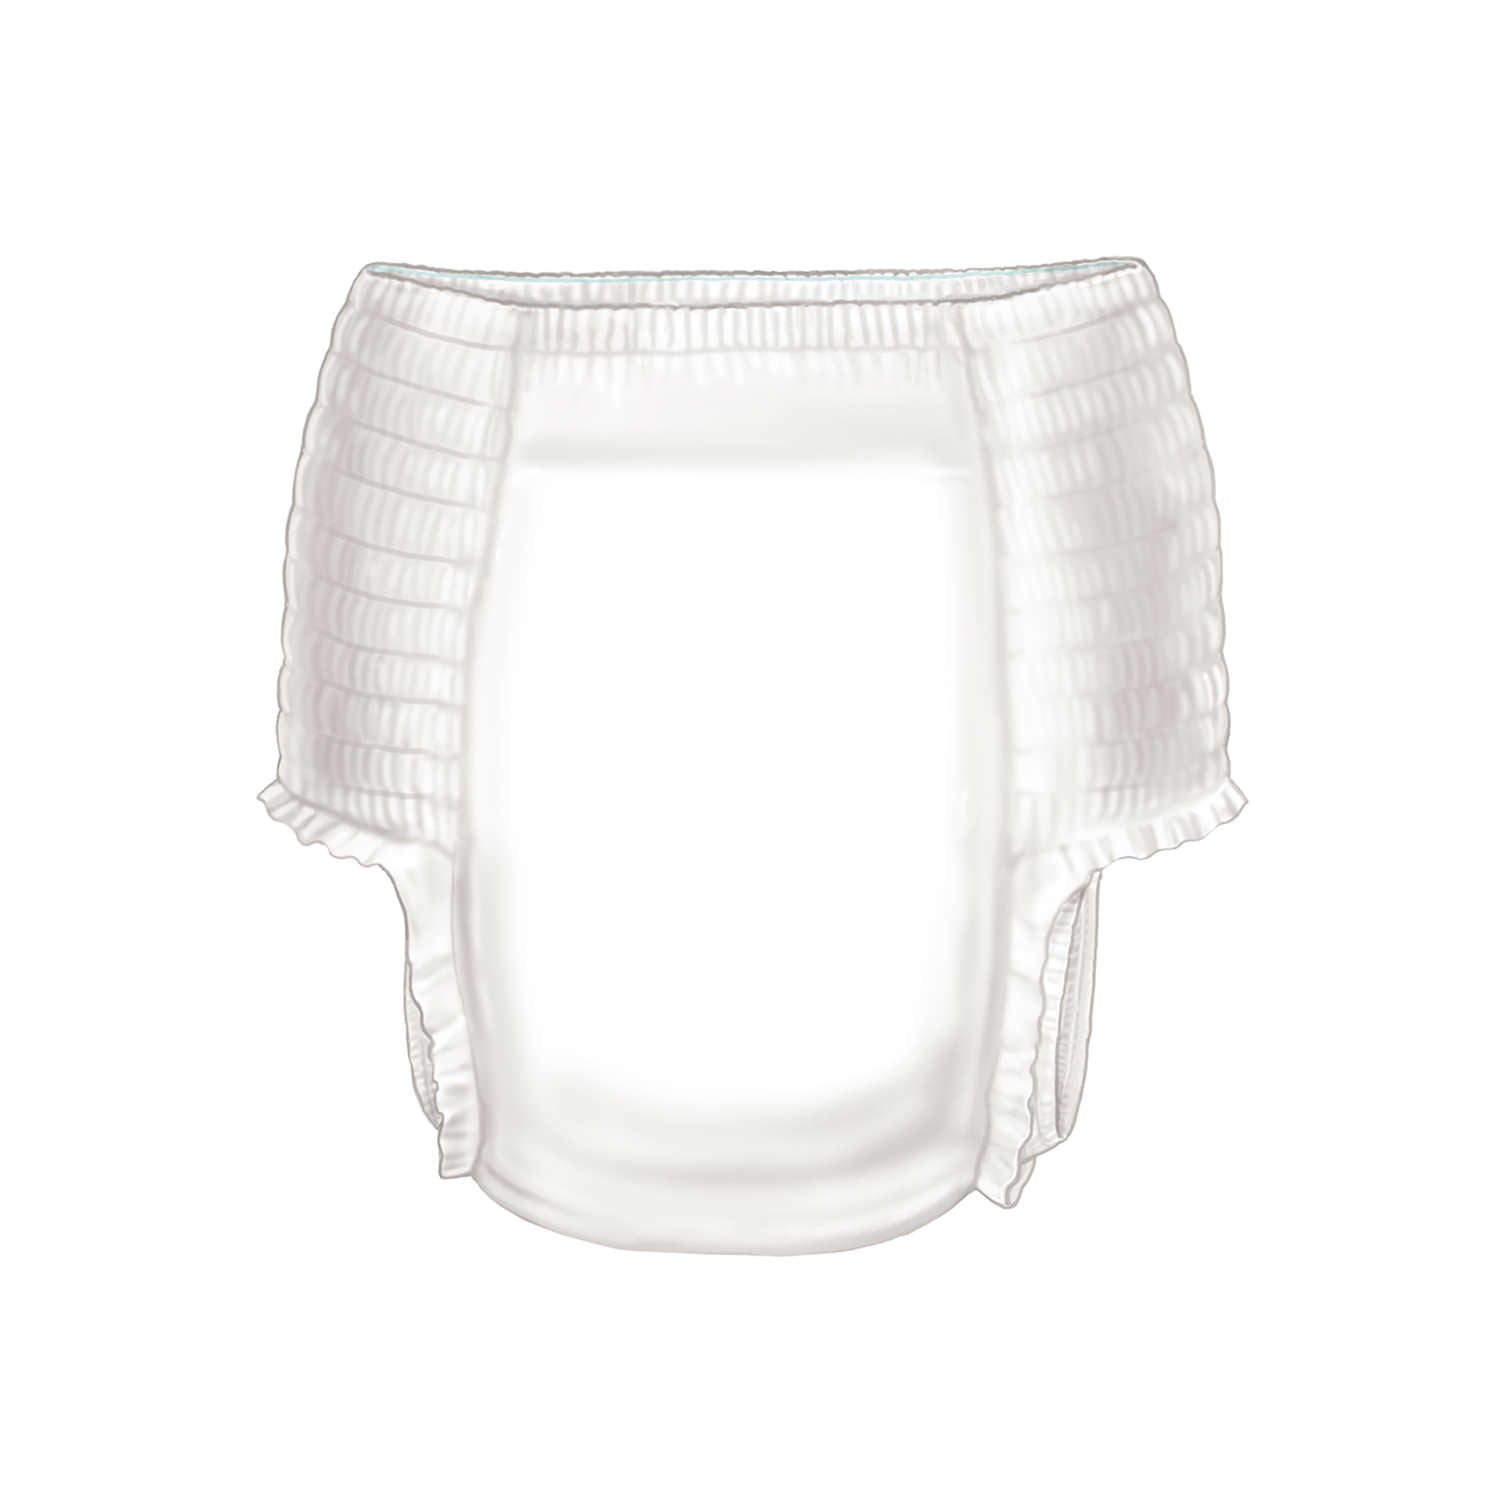 Disposable Try On Panties, Junior Size